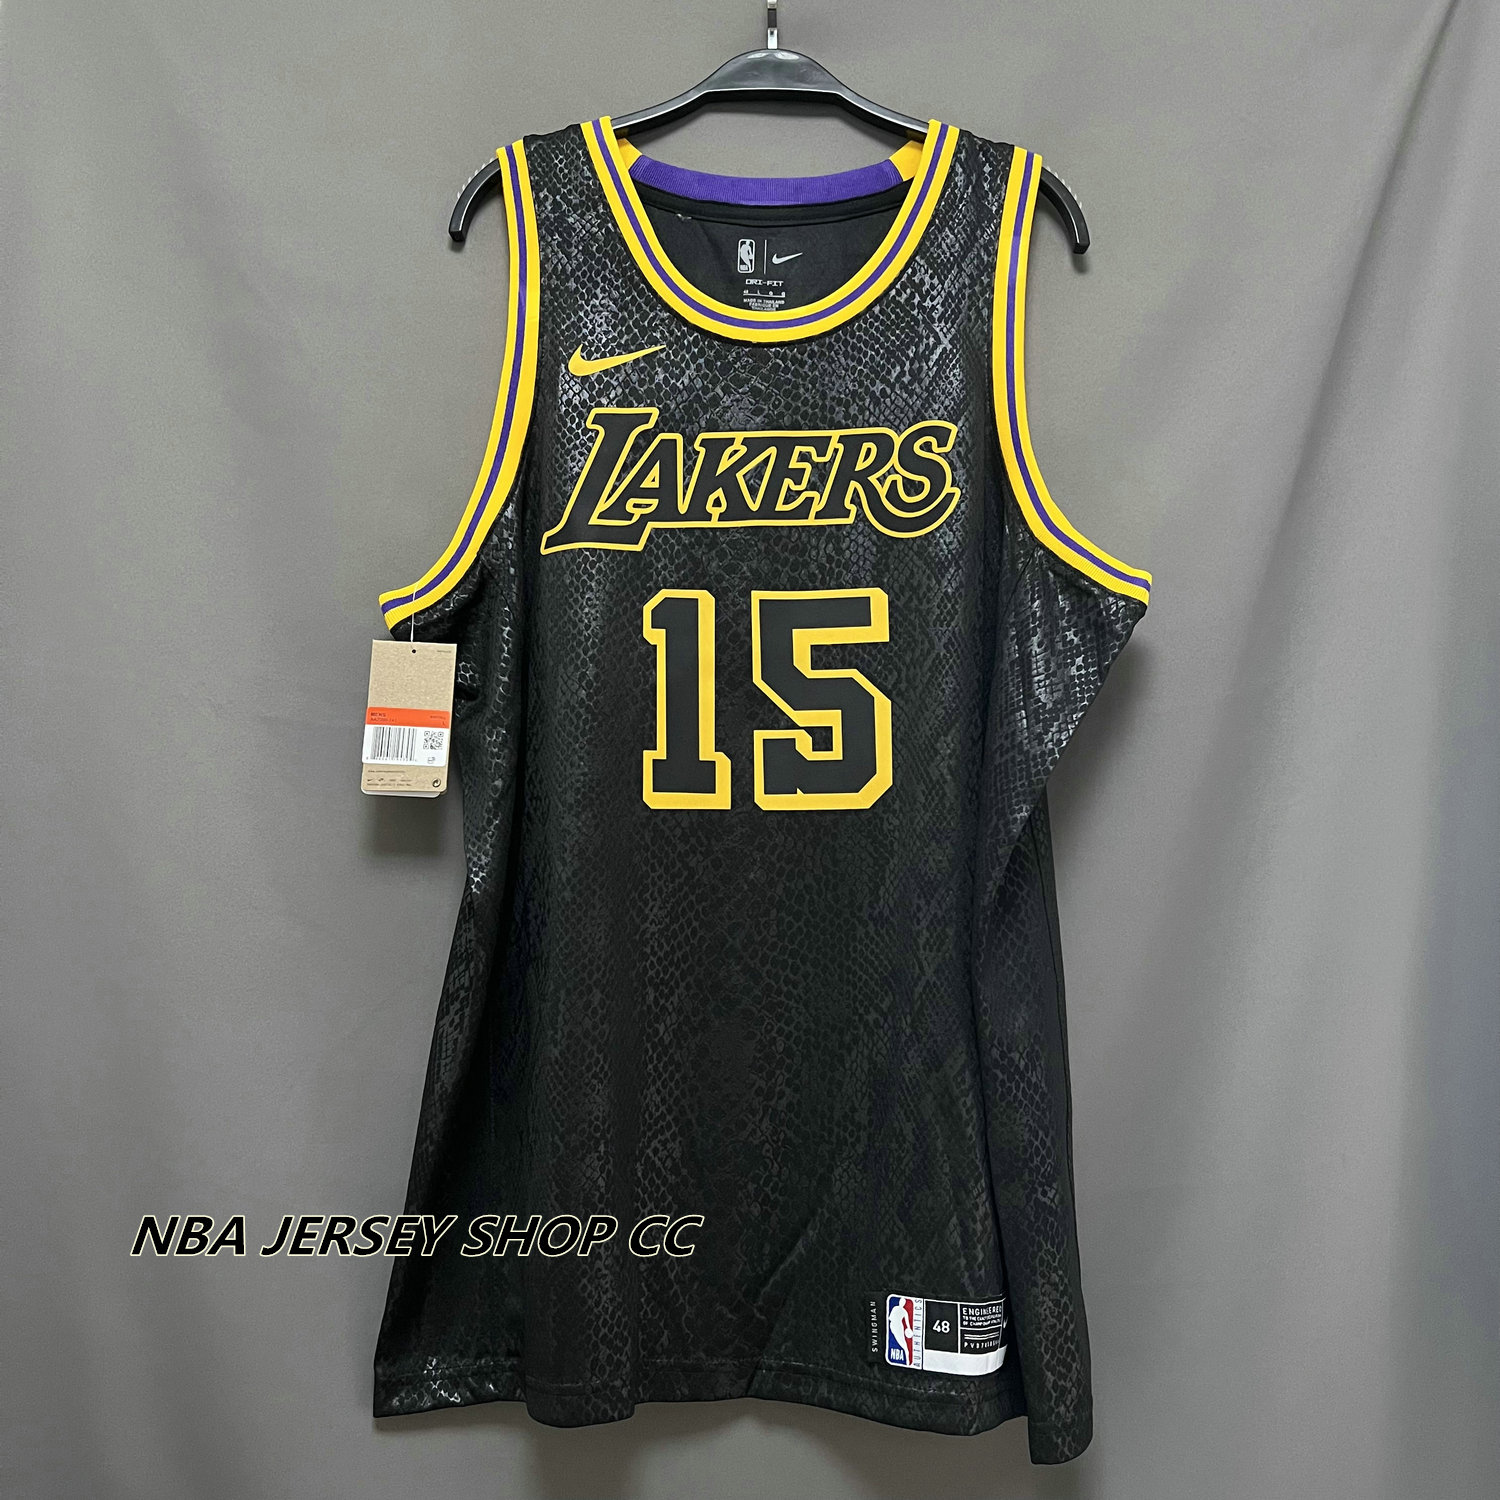 Los Angeles Lakers 17 Dennis Schroder White Jersey 2022-23 Classic Edition  - Bluefink